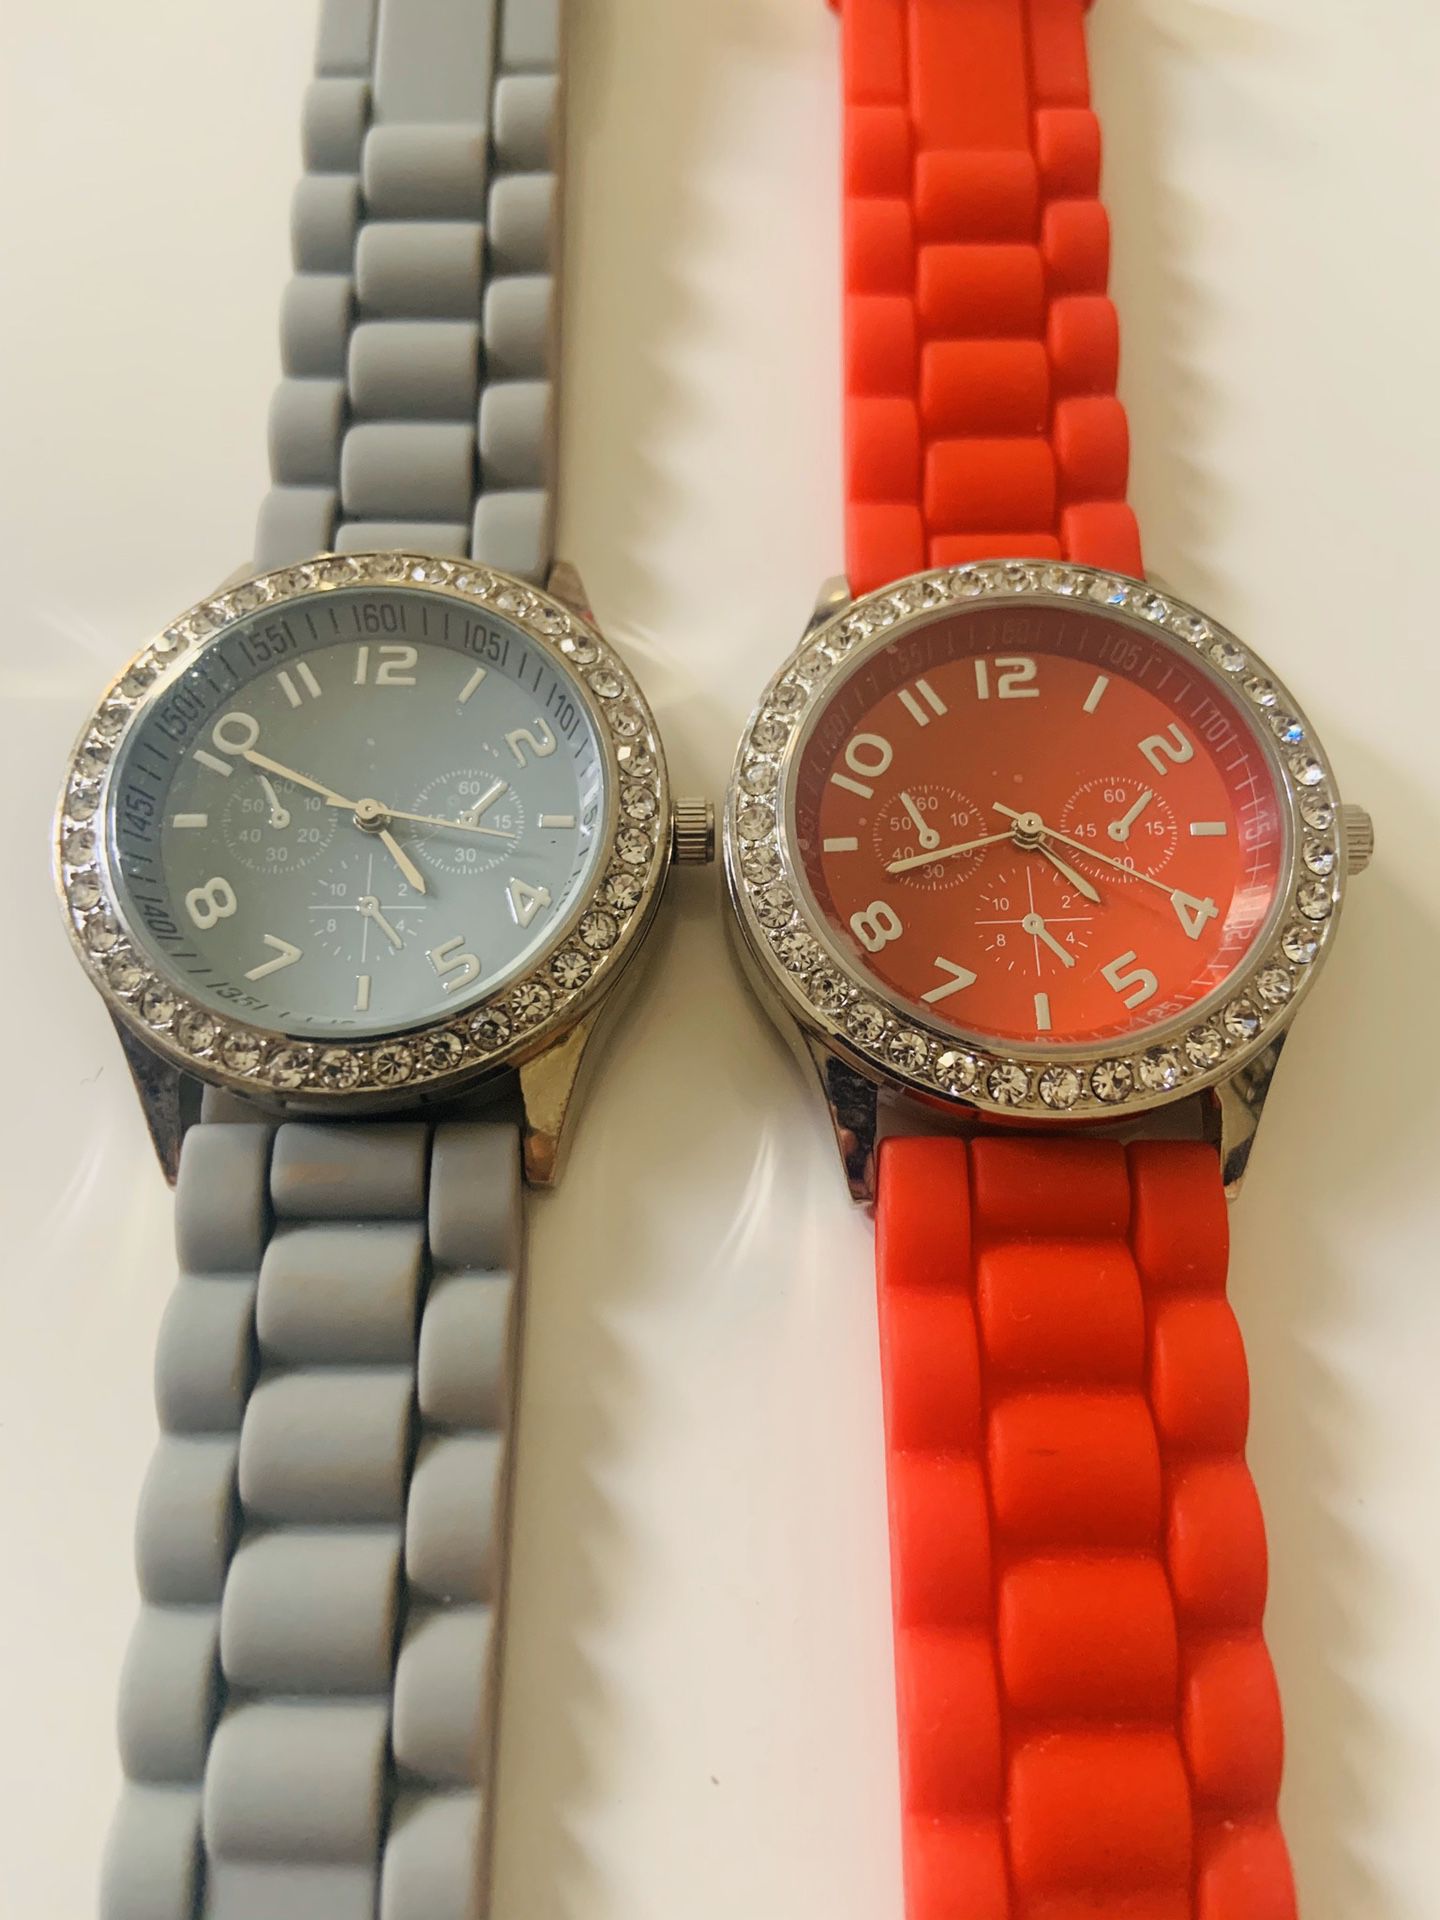 Darice Ladies Watch Quartz, Red & Gray Face Silver Dial Crystal Bezel,Chronograph looks